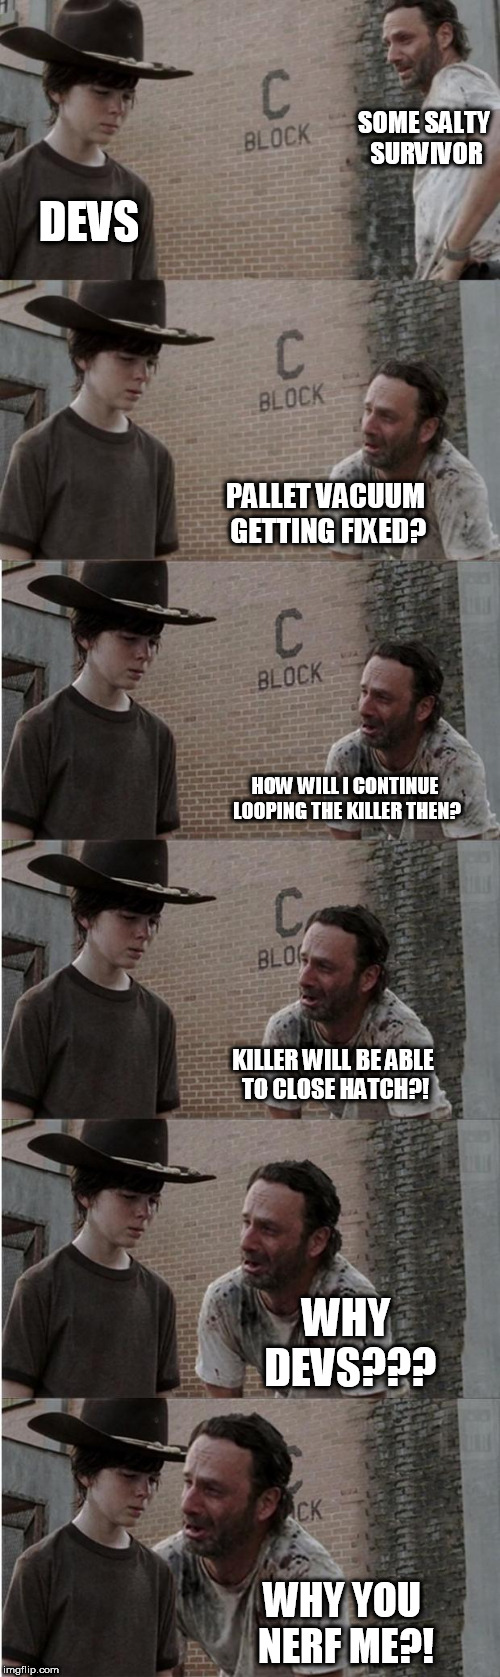 Rick and Carl Longer | SOME SALTY SURVIVOR; DEVS; PALLET VACUUM GETTING FIXED? HOW WILL I CONTINUE LOOPING THE KILLER THEN? KILLER WILL BE ABLE TO CLOSE HATCH?! WHY DEVS??? WHY YOU NERF ME?! | image tagged in memes,rick and carl longer | made w/ Imgflip meme maker